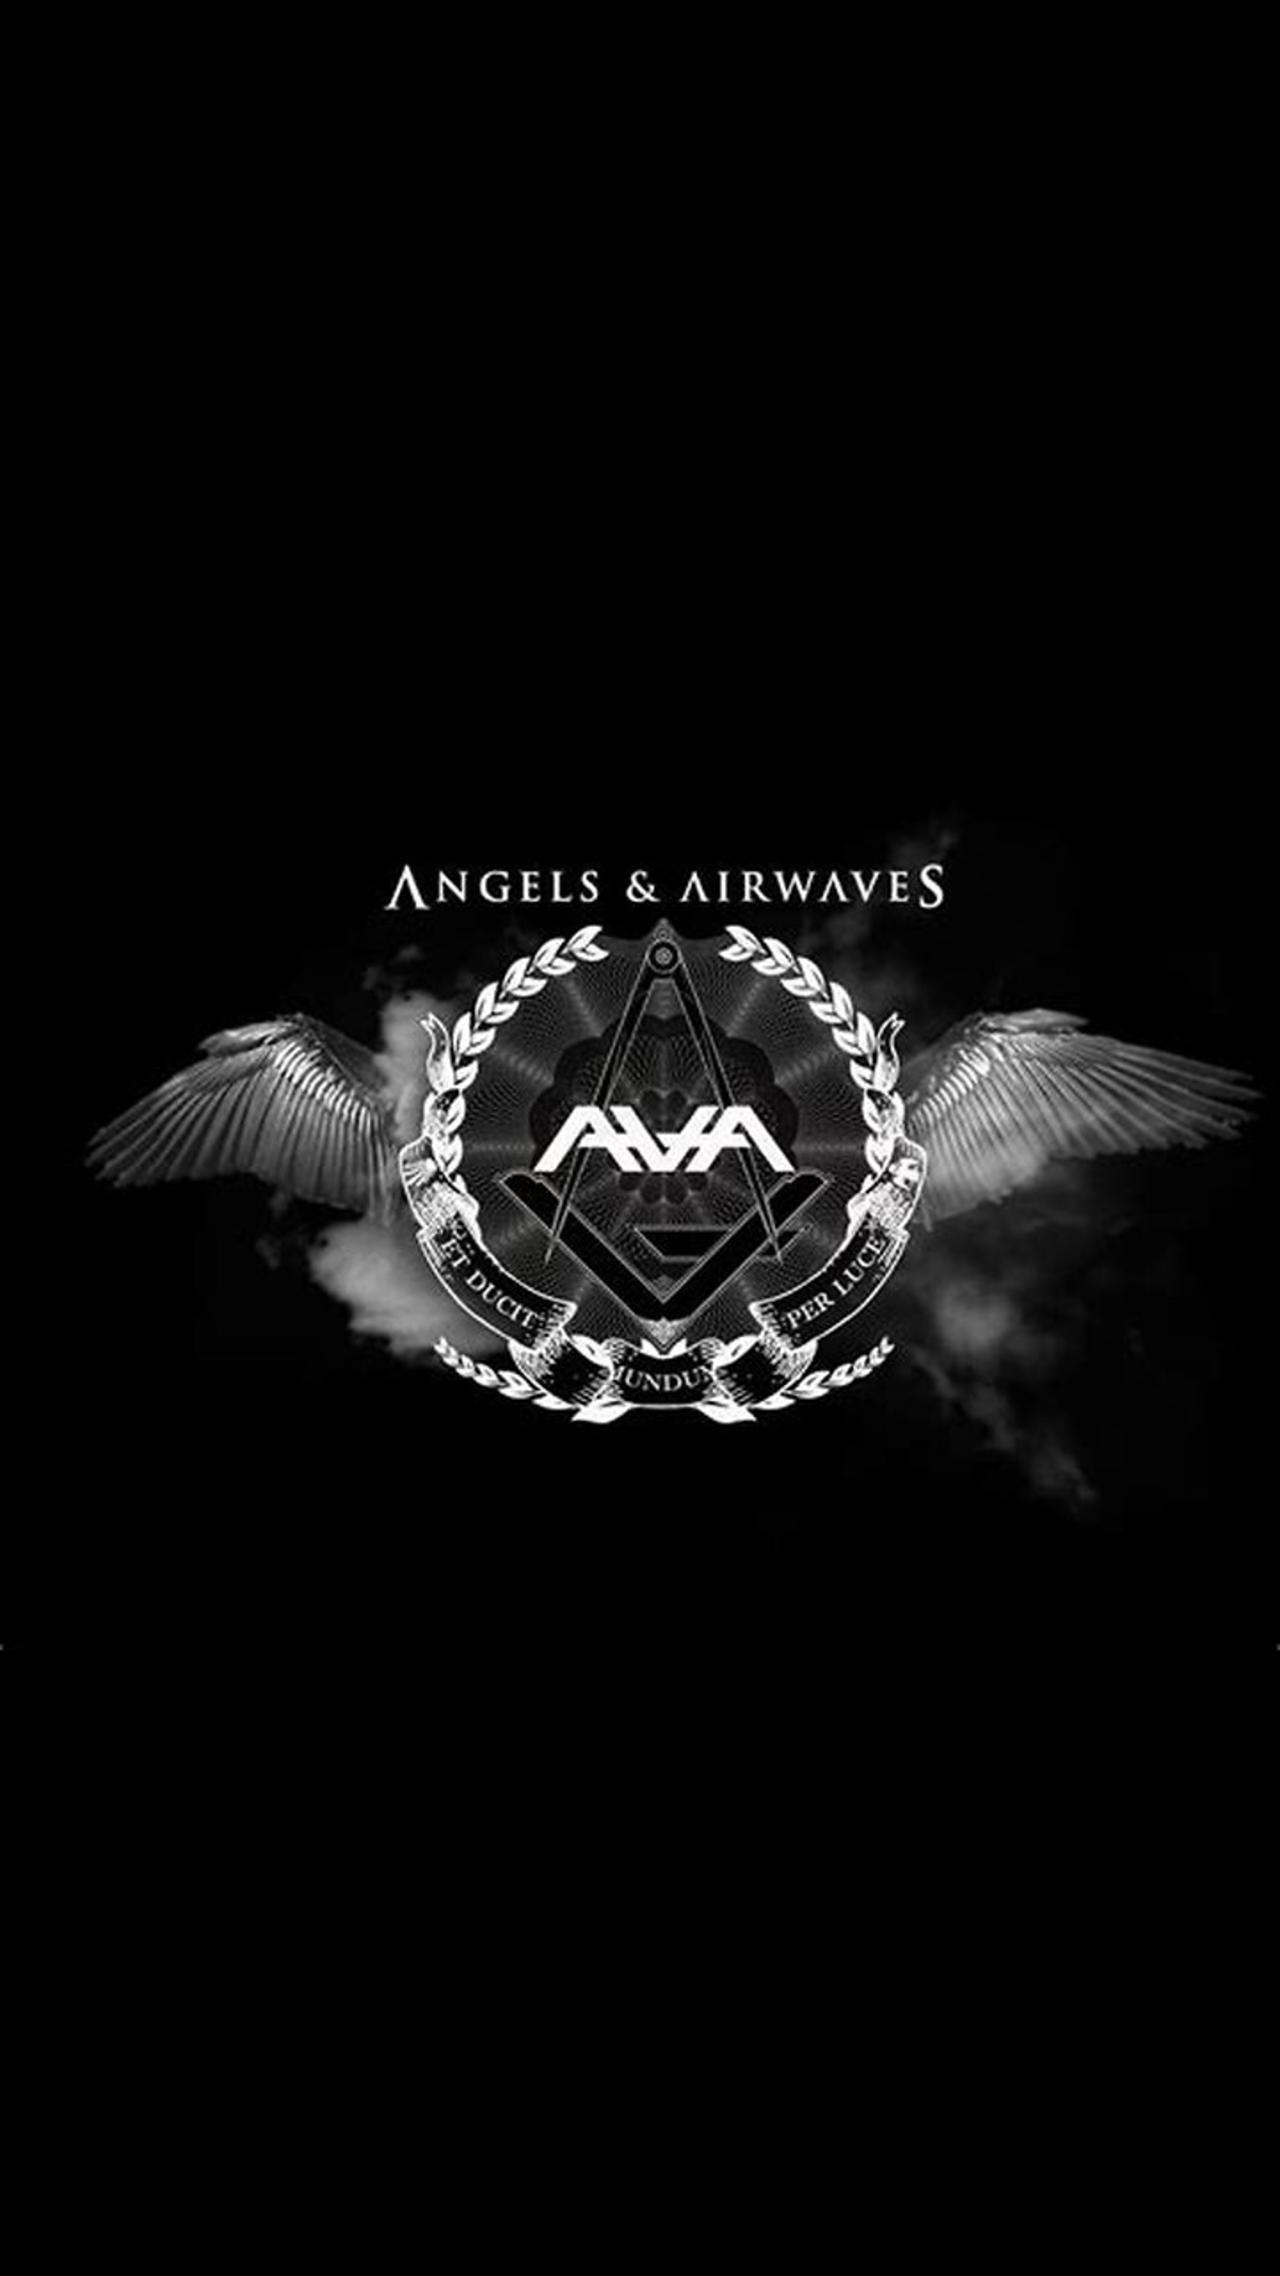 (Ghost, Spirit, Soul) Tom DeLonge, passing of his father, (Tunnels) Angels & Airwaves